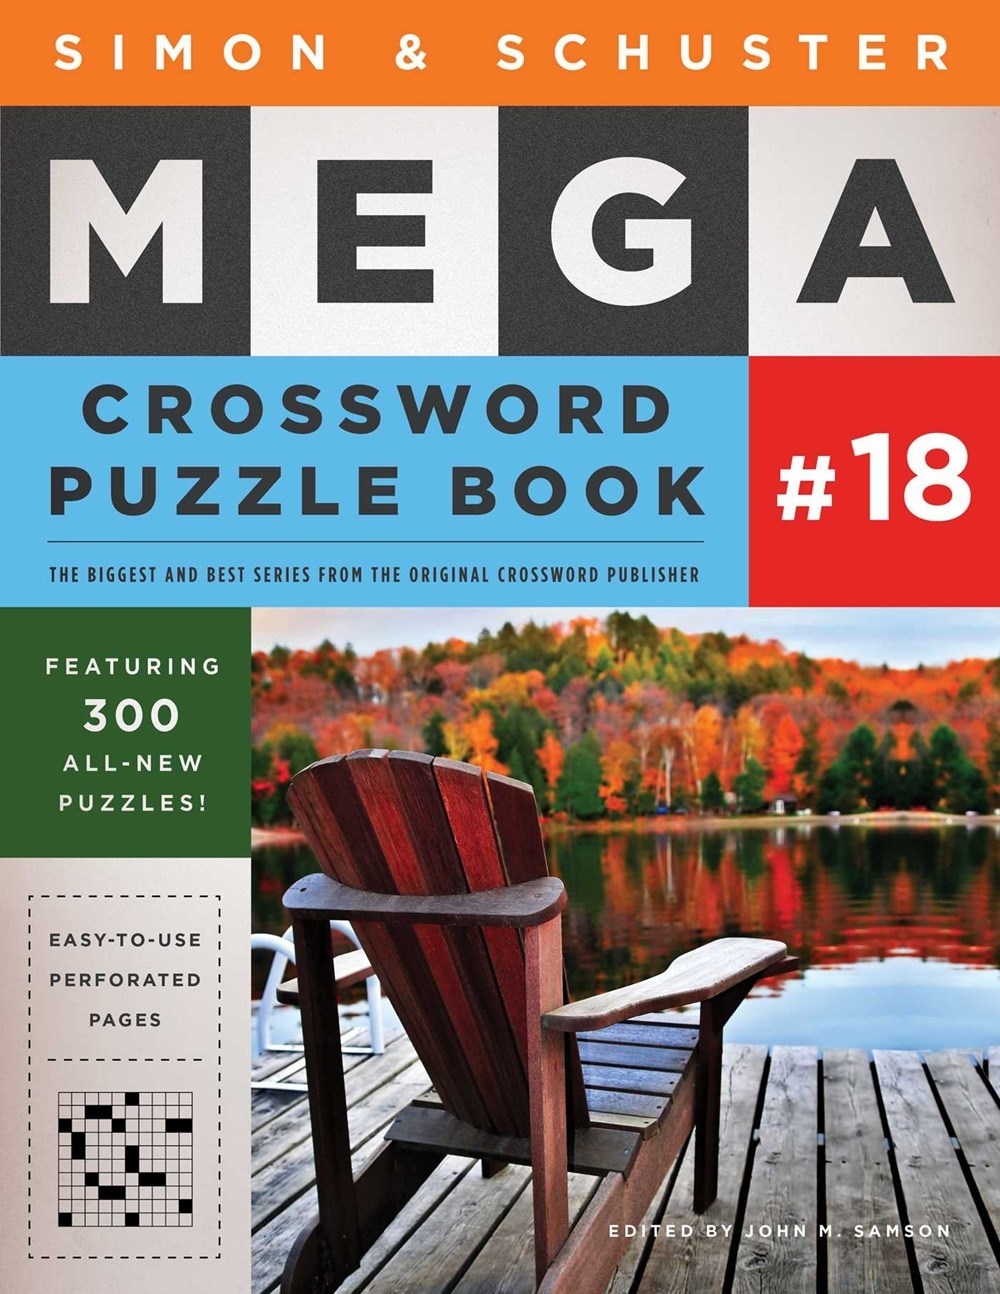 Simon and Schuster's Mega Crossword Puzzles nº18